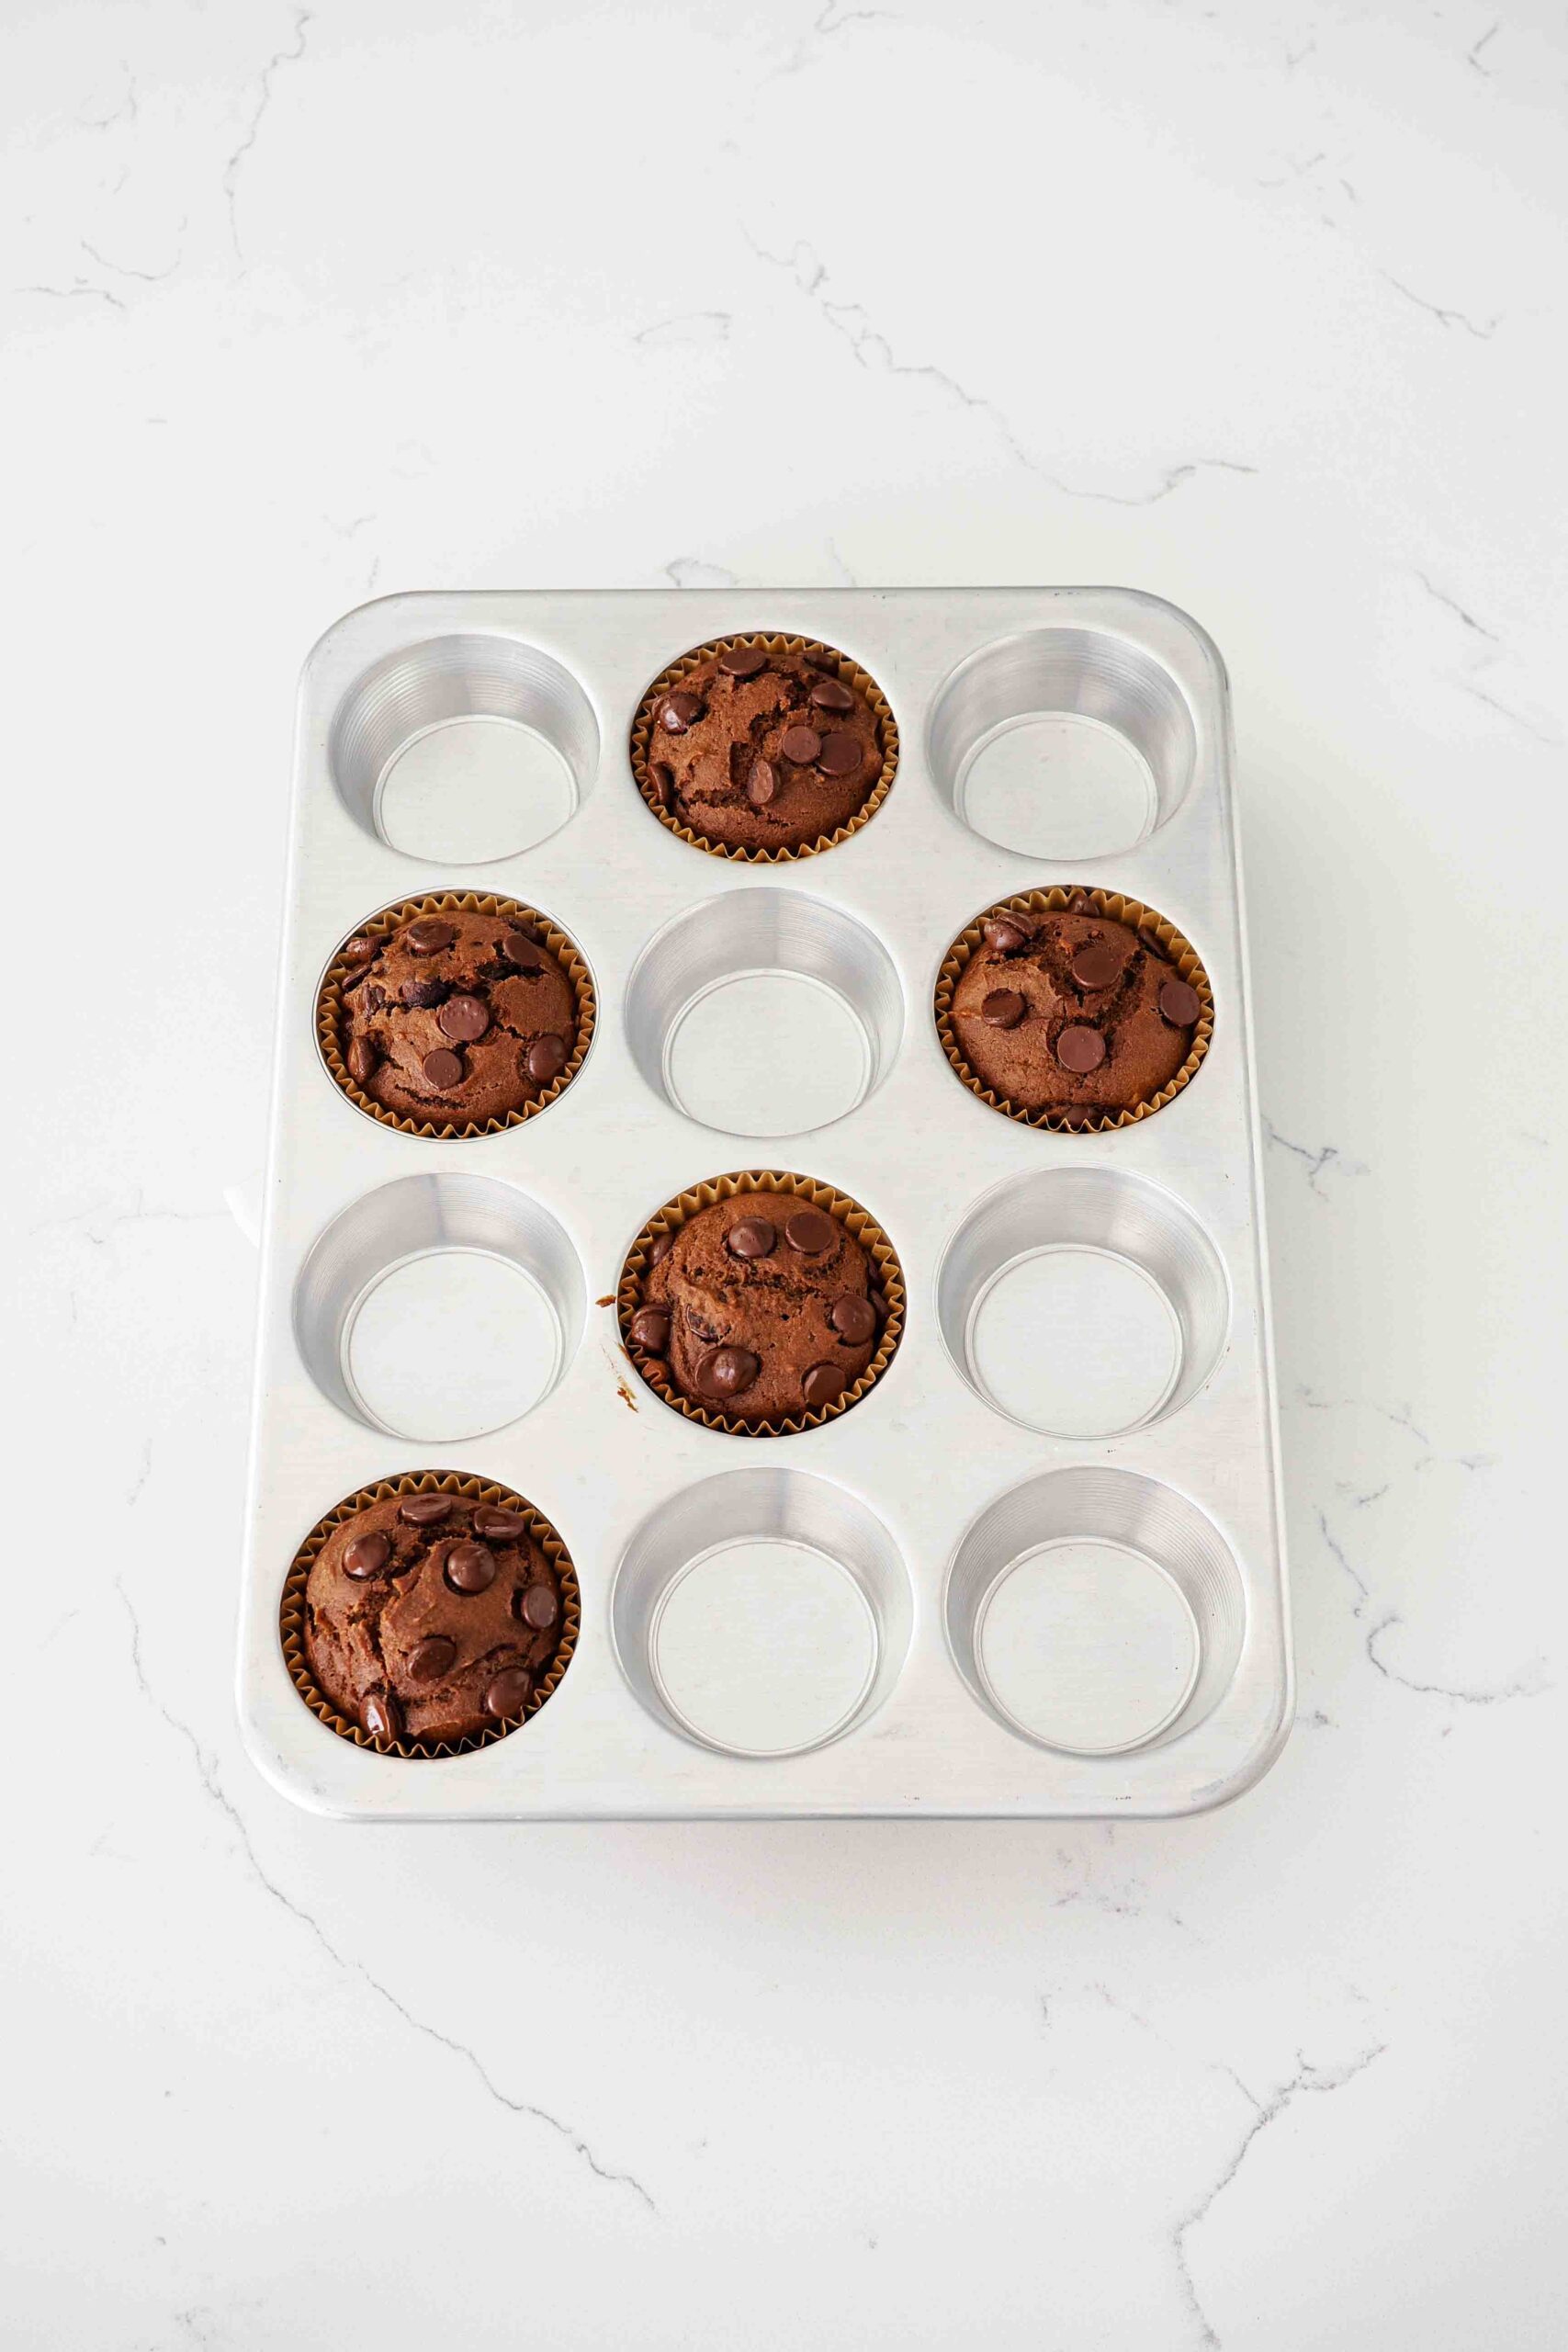 Fully baked chocolate pumpkin muffins in an aluminum muffin pan.